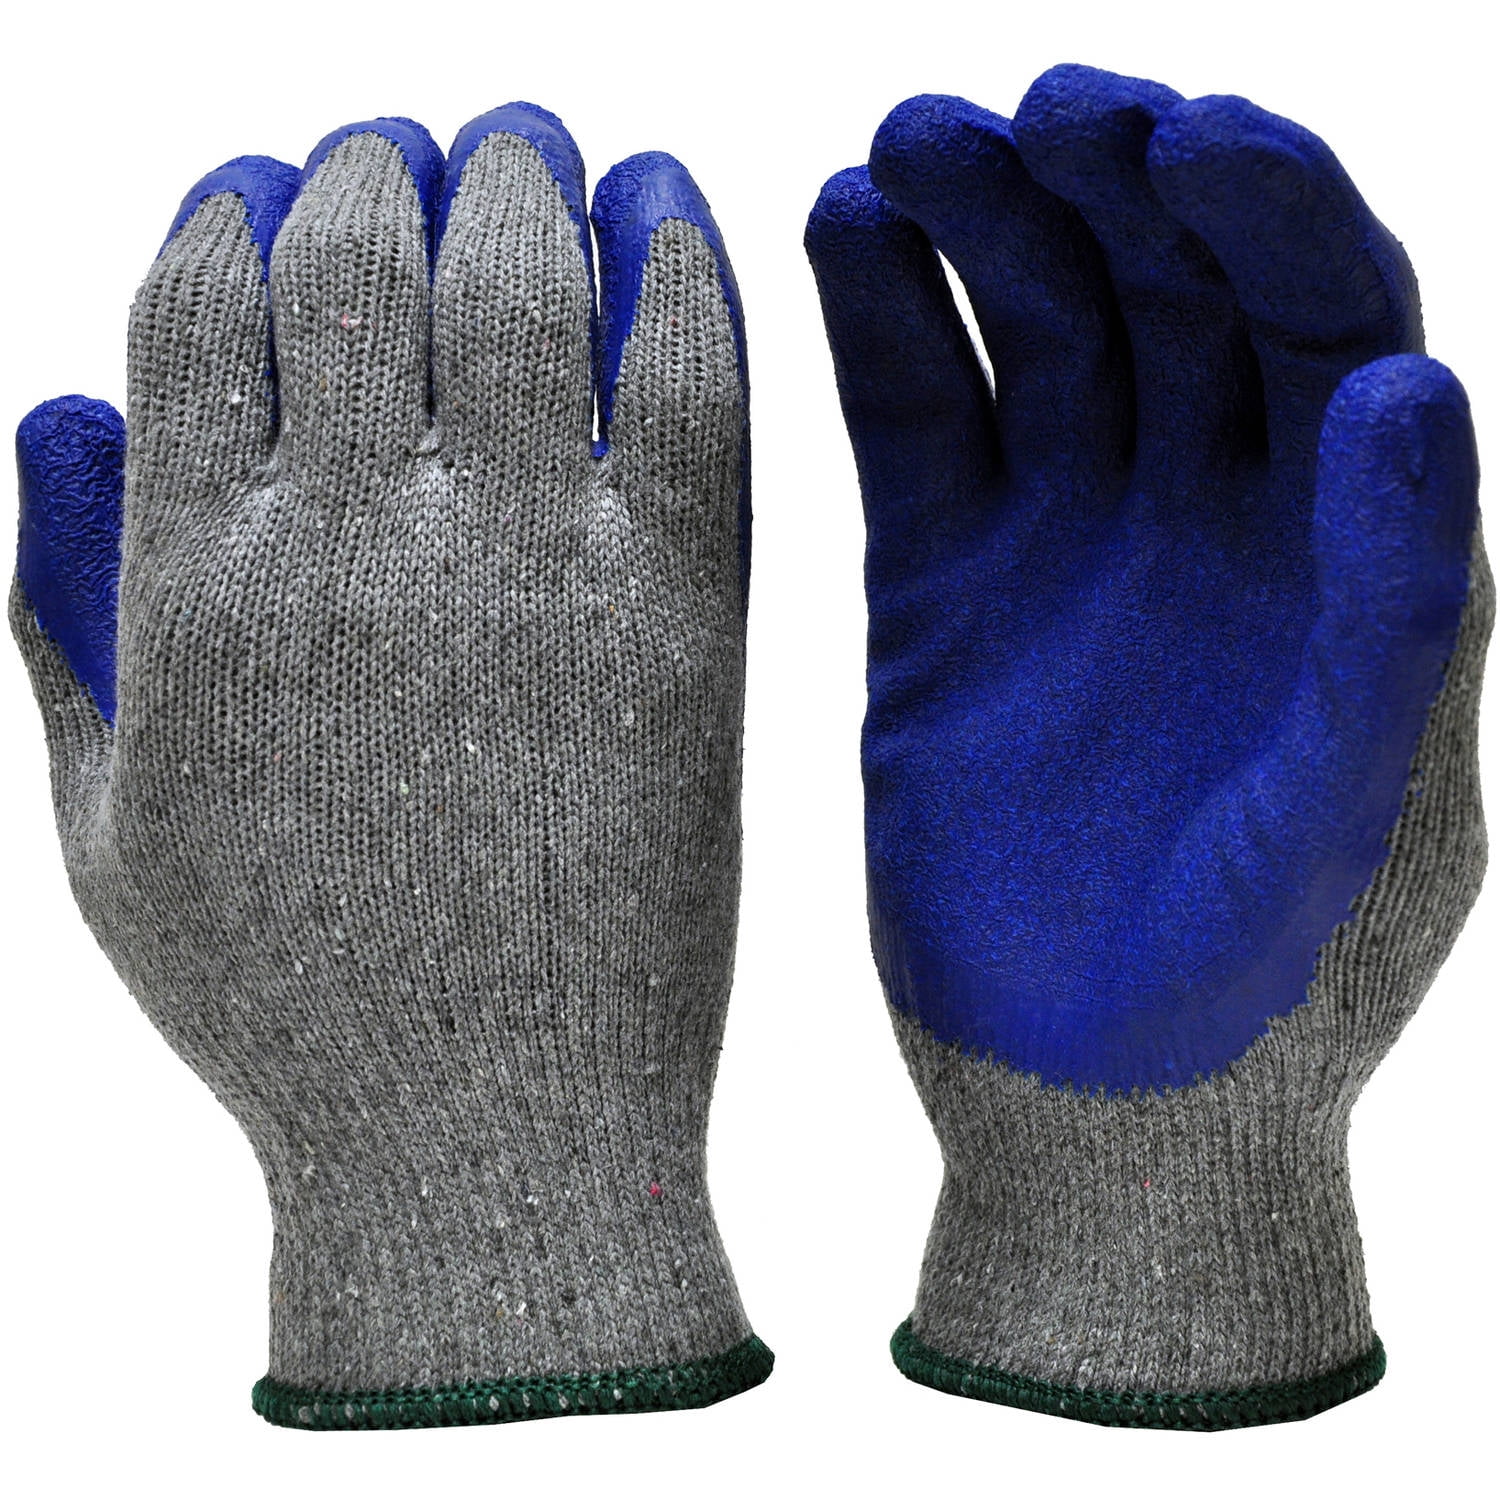 1 Pair Extra-Thick Rubber Palm Work Gloves X-Large 